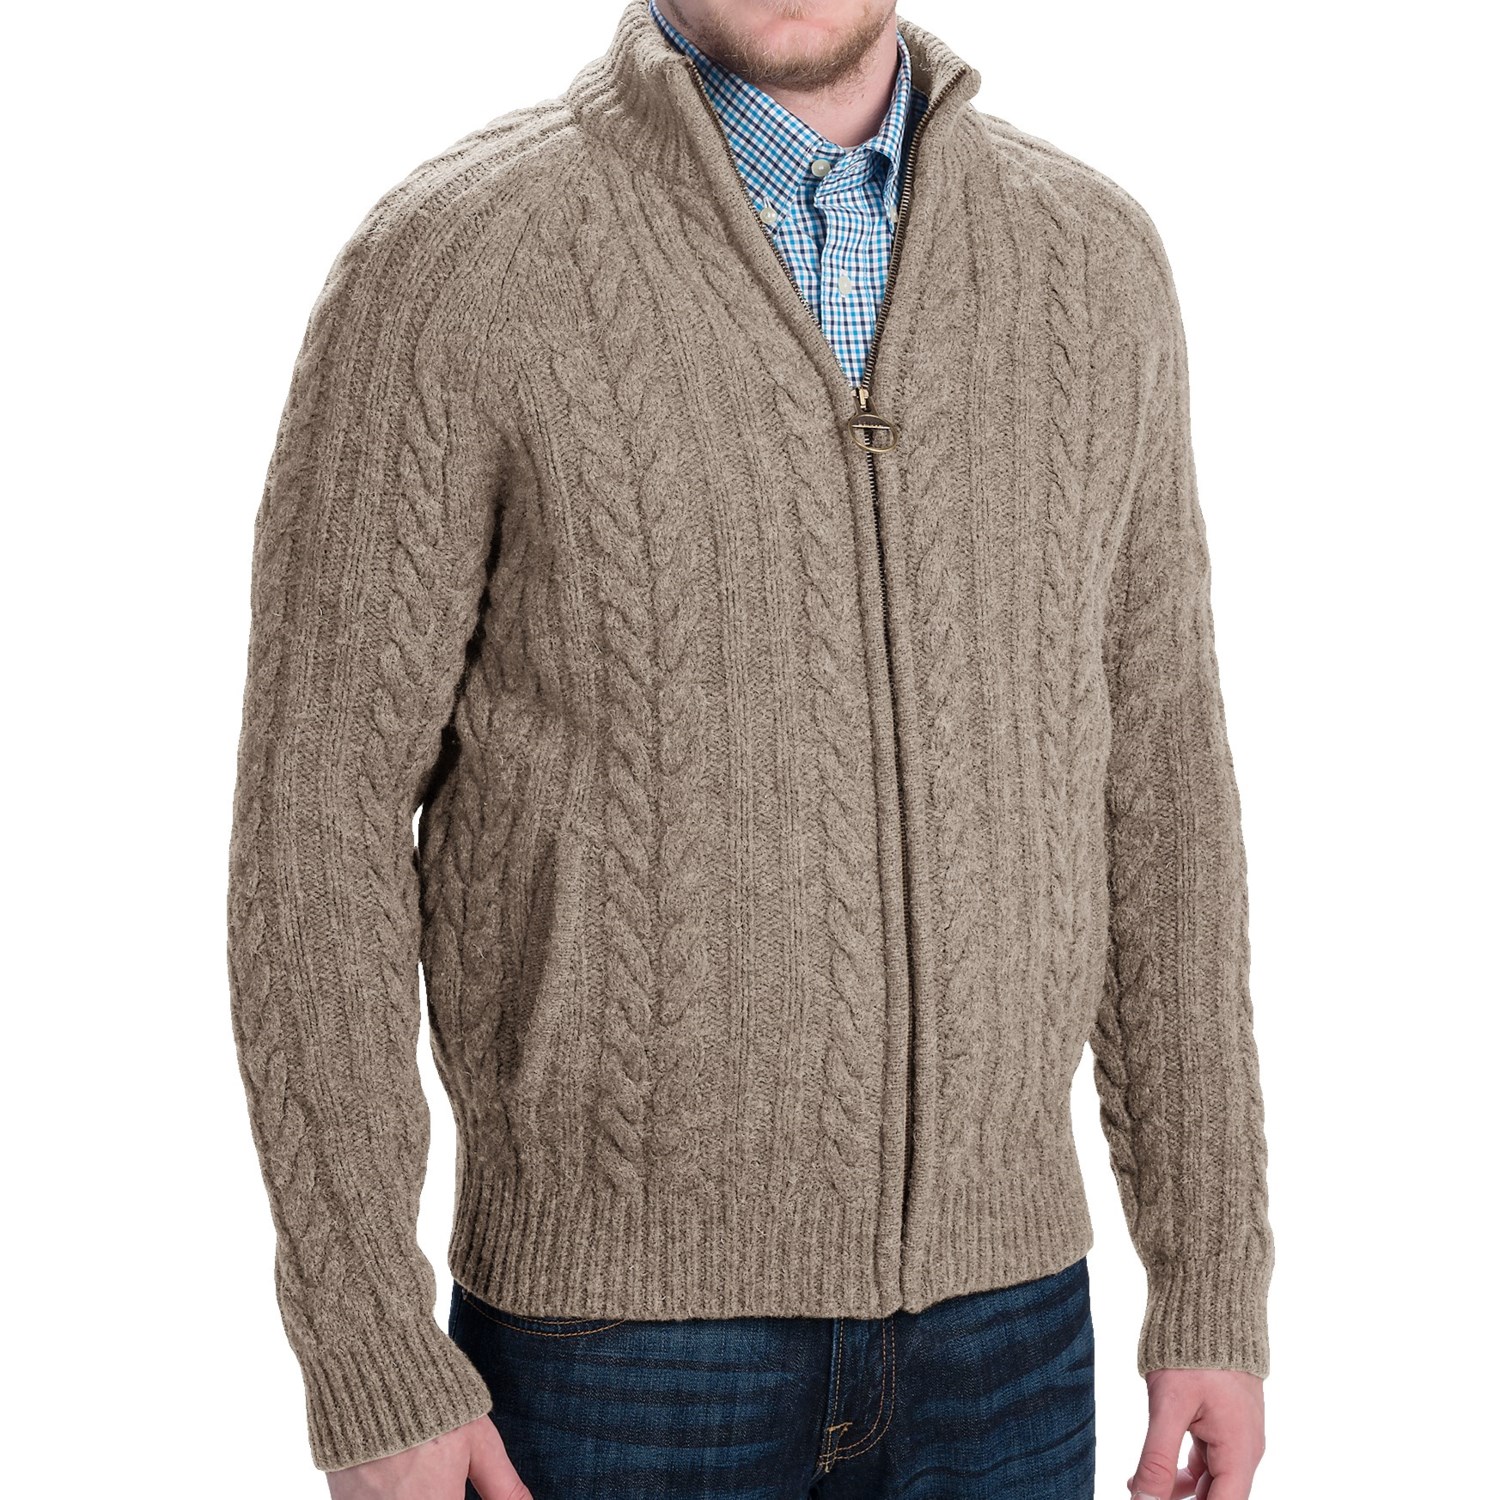 Barbour Rope Cable-Knit Shetland Wool Sweater (For Men) 8780H - Save 59%